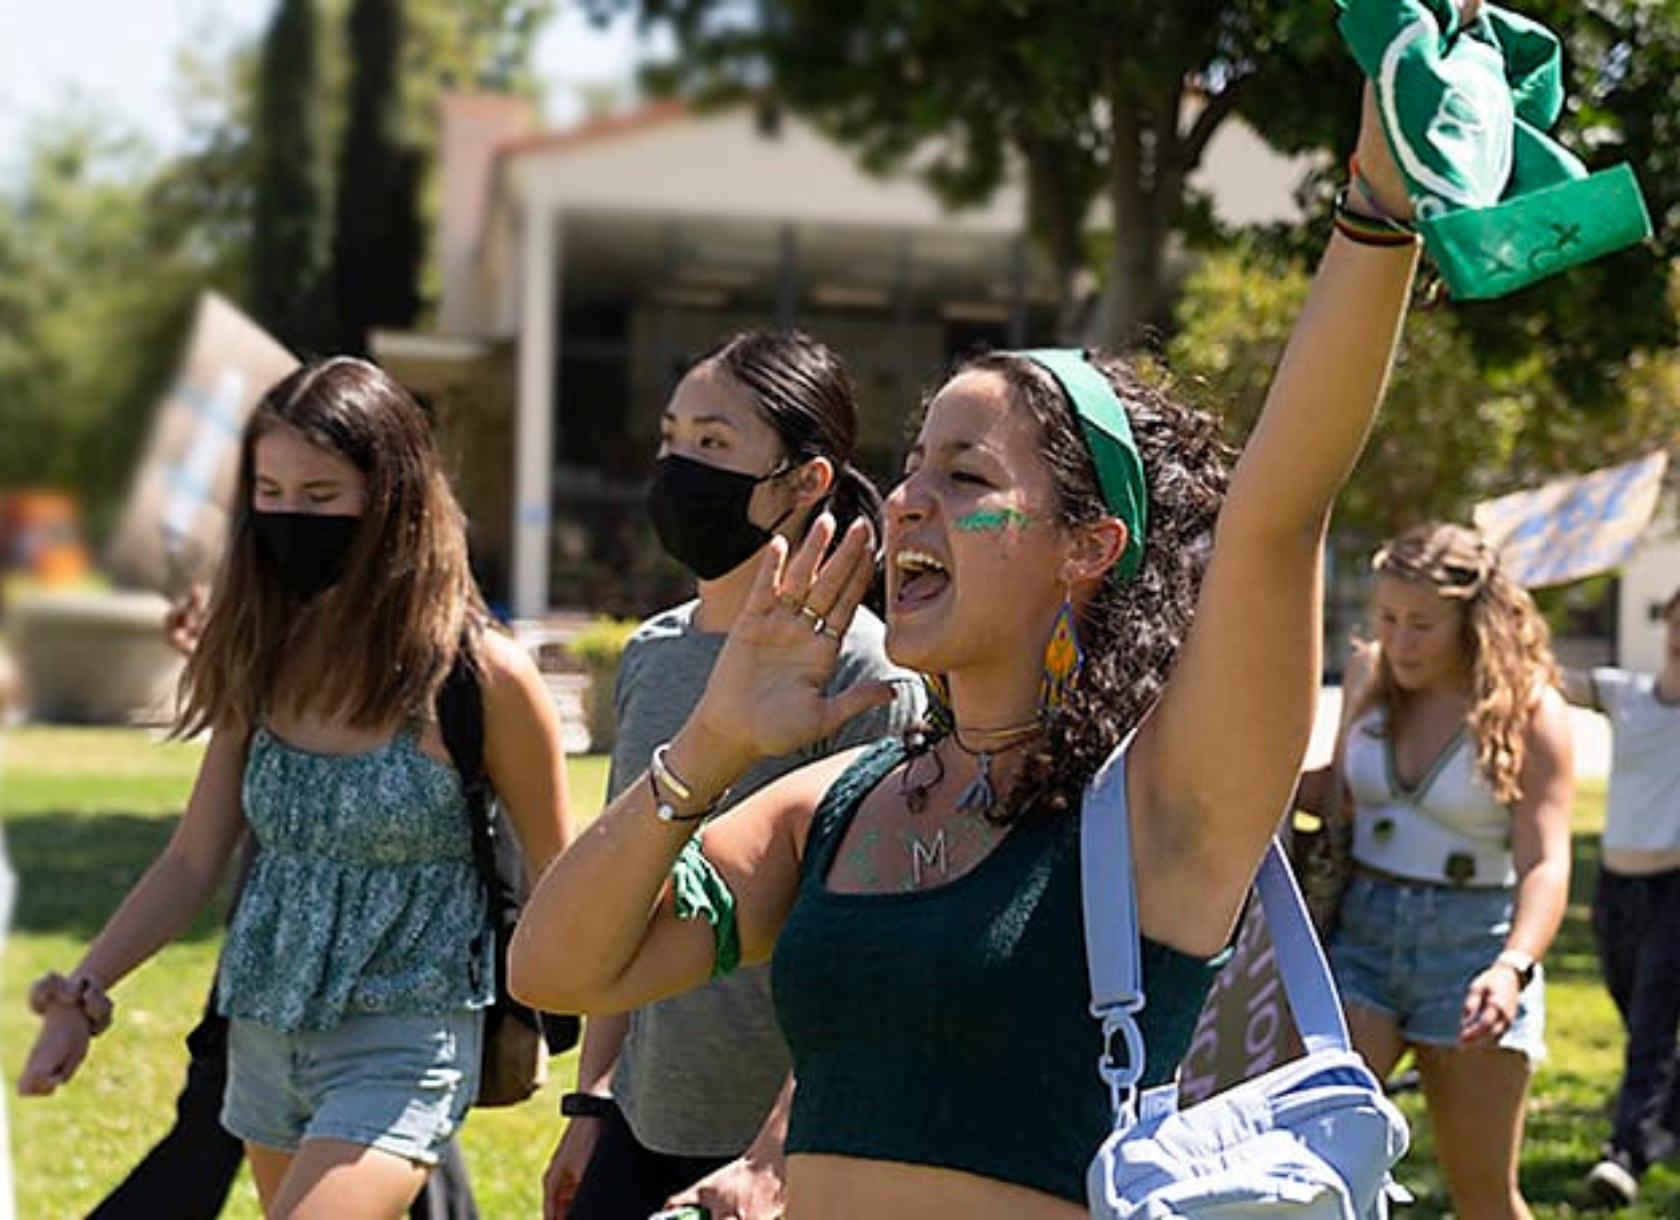 Claremont Colleges students protest the SCOTUS draft opinion that would overturn Roe v. Wade